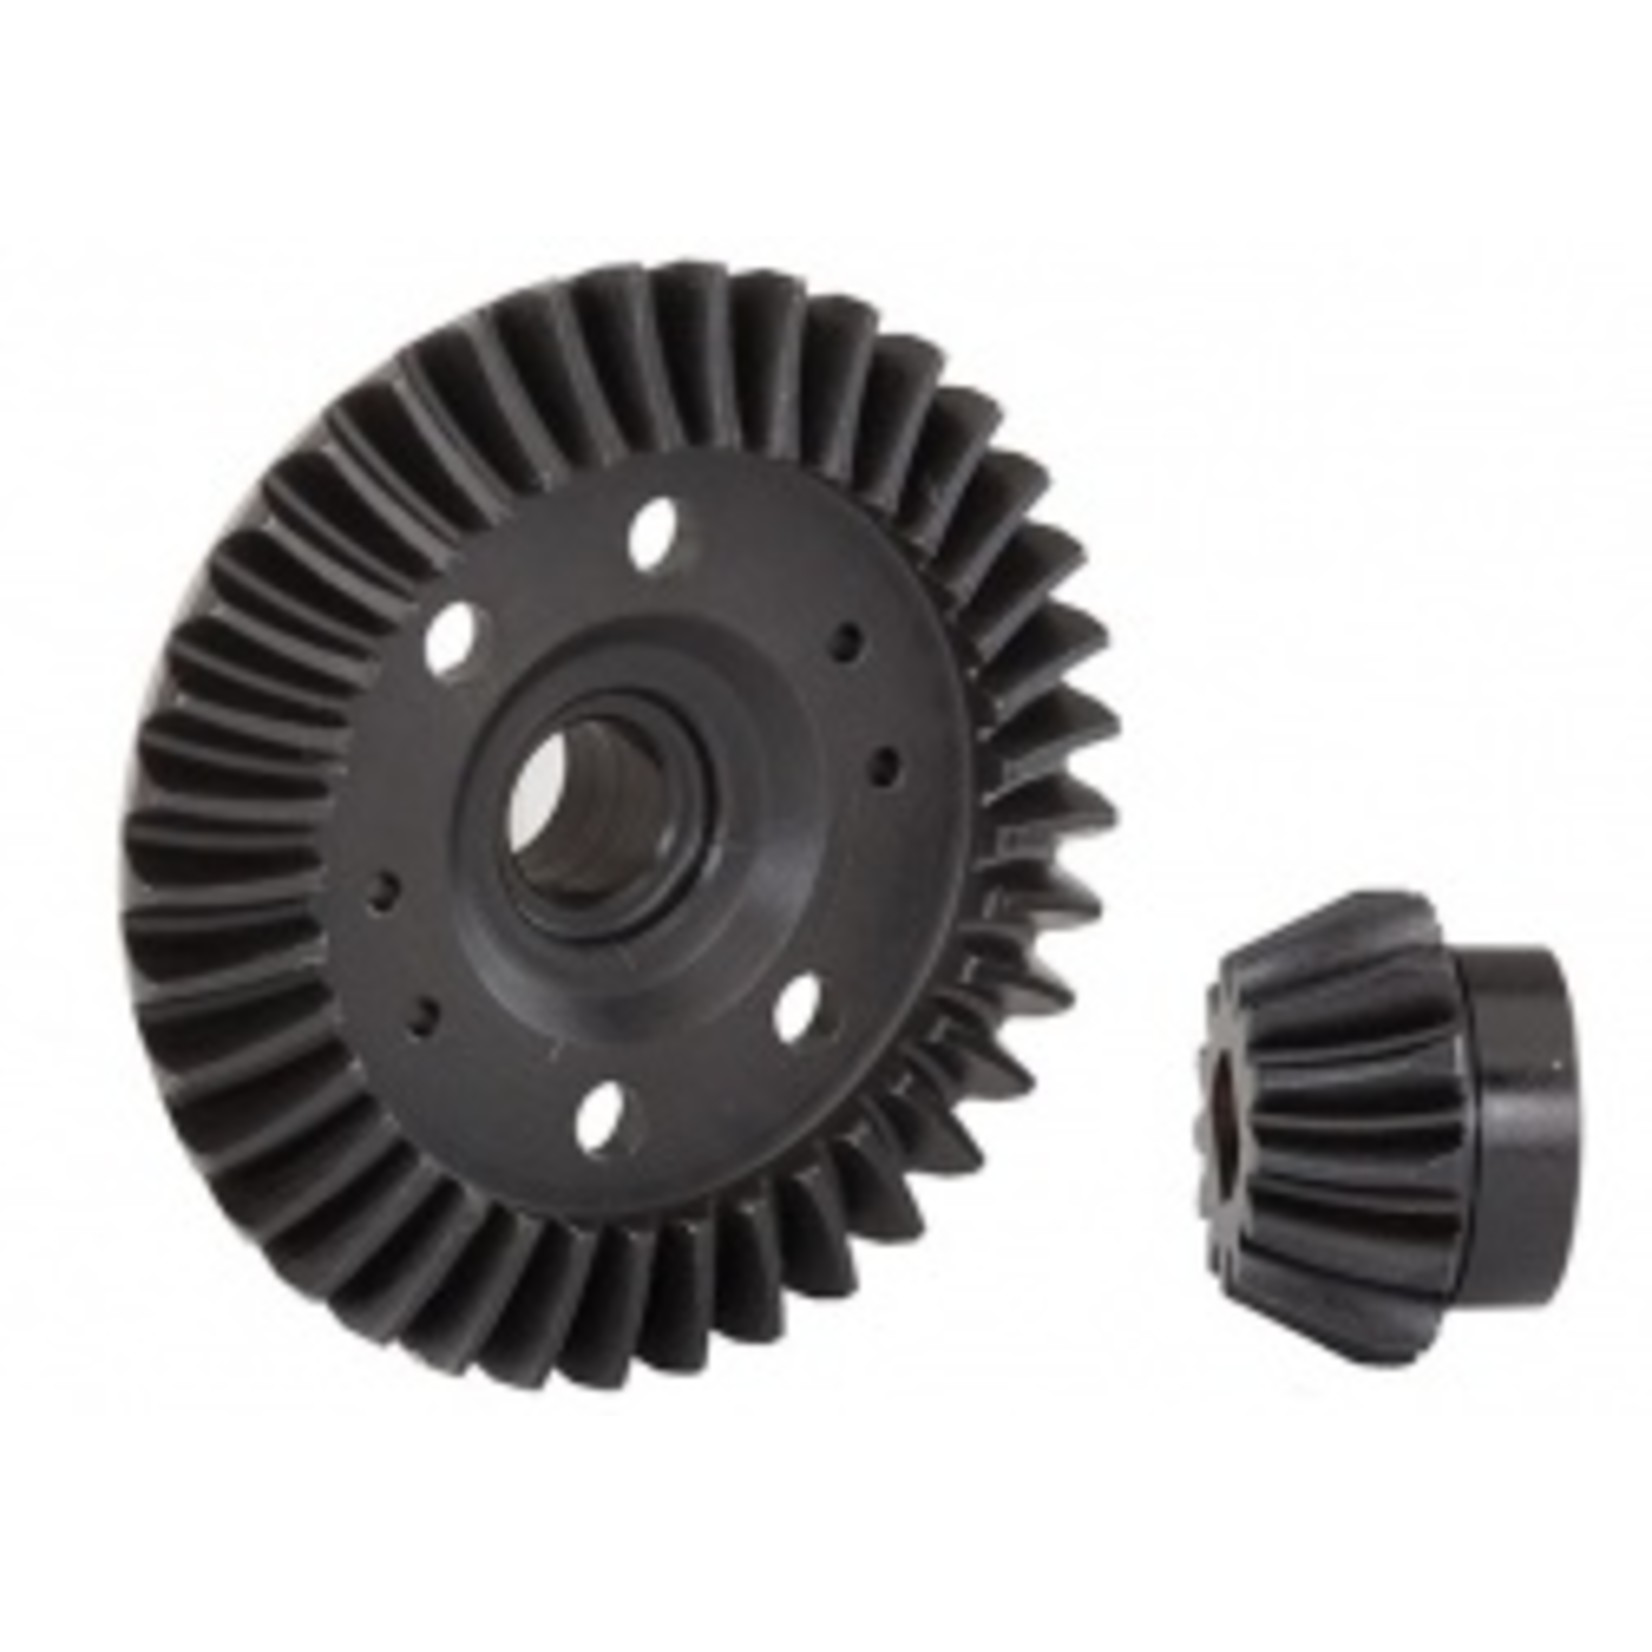 Traxxas Ring and Pinion Spiral Cut